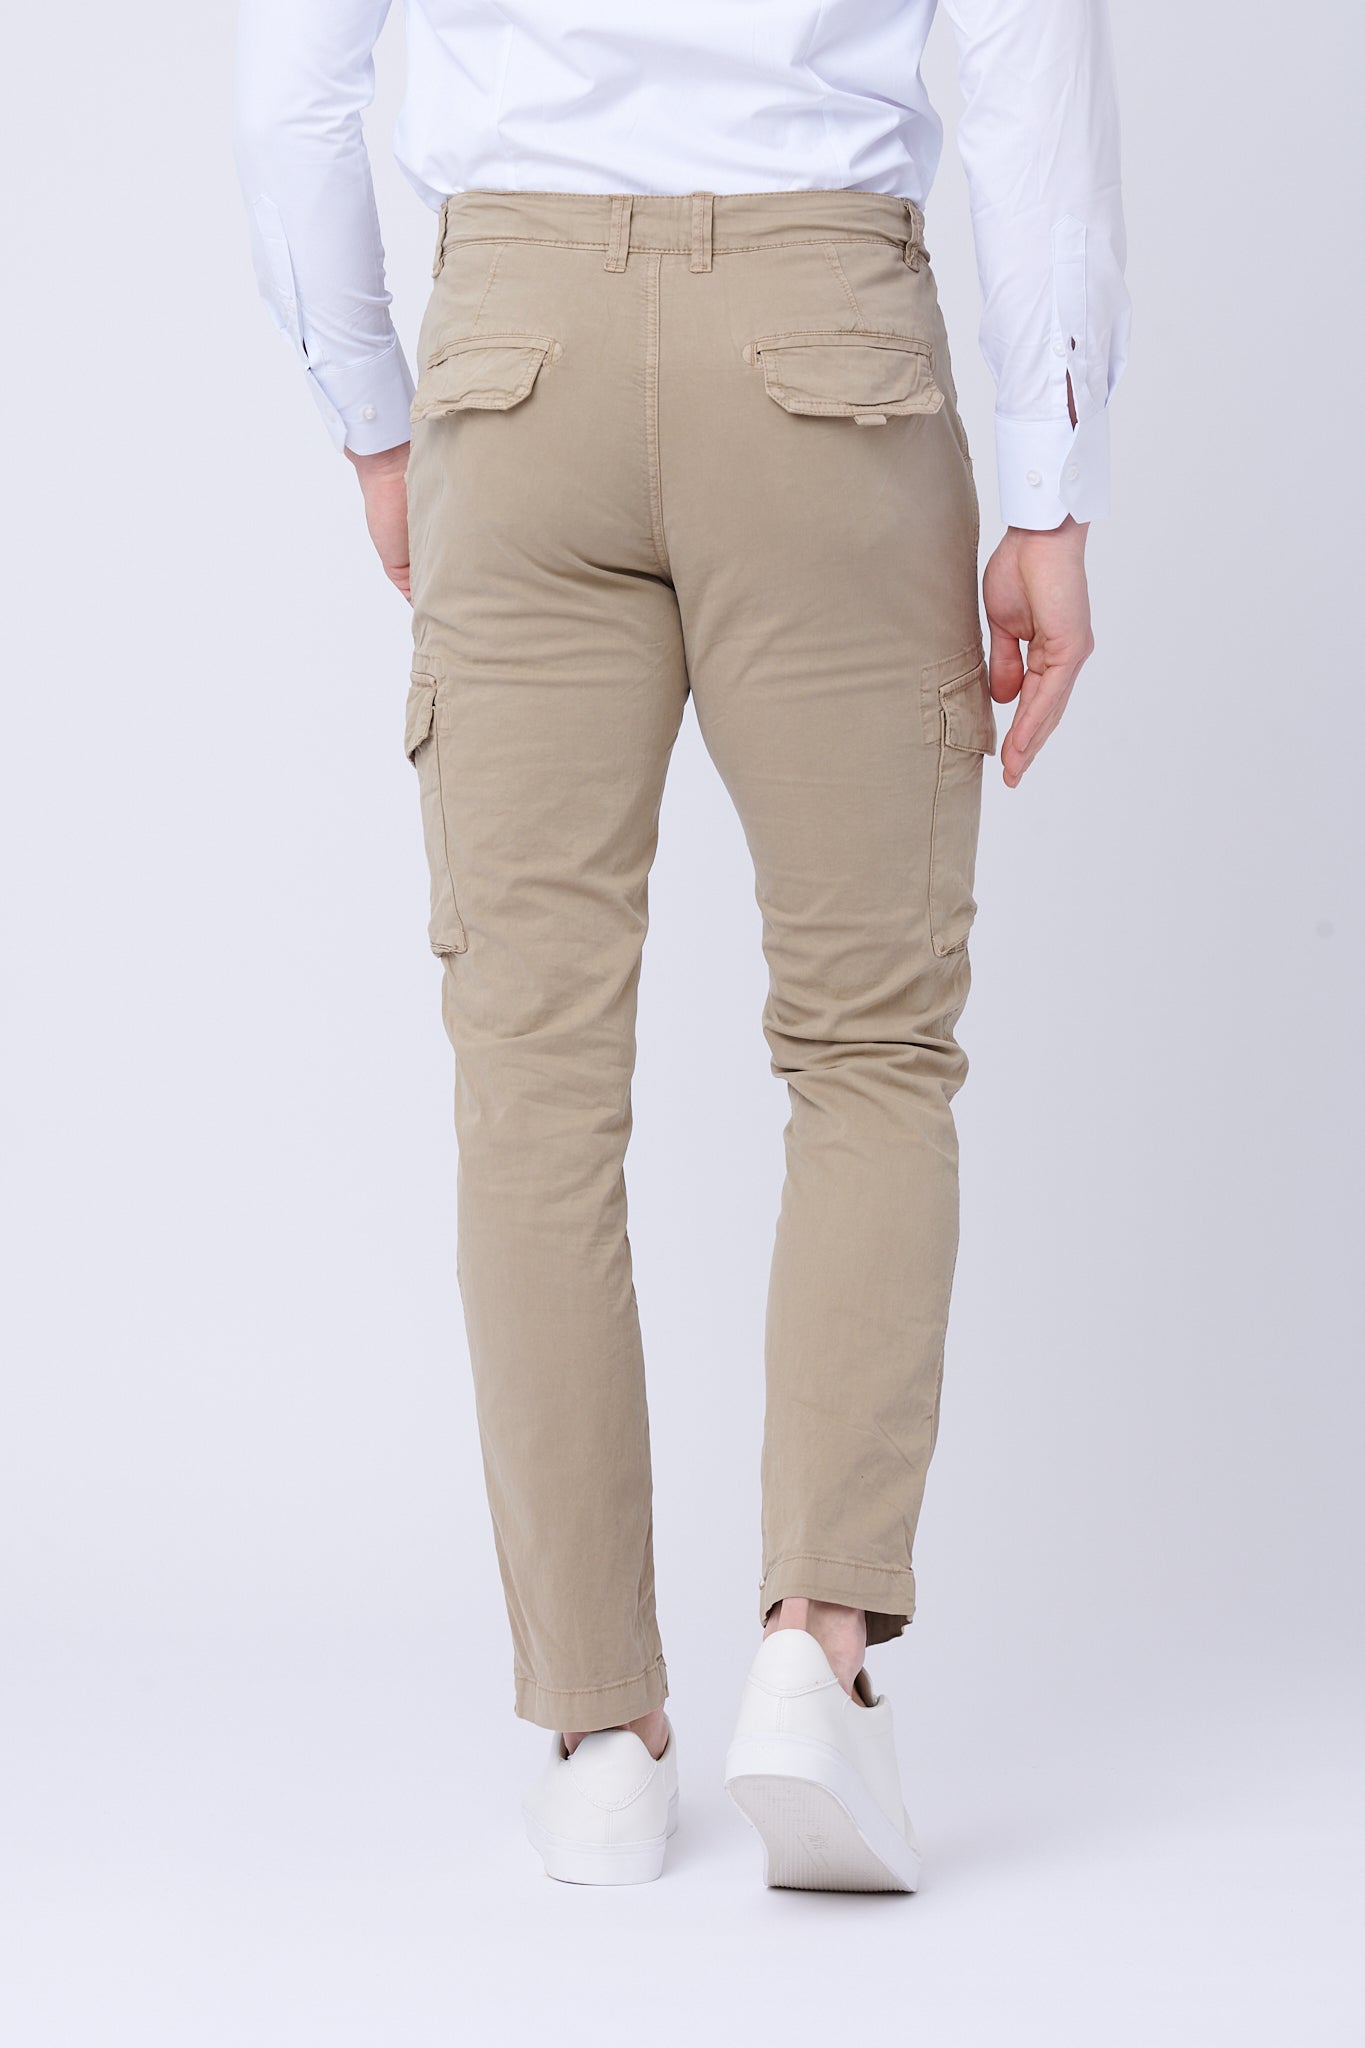 Beige trousers with pockets